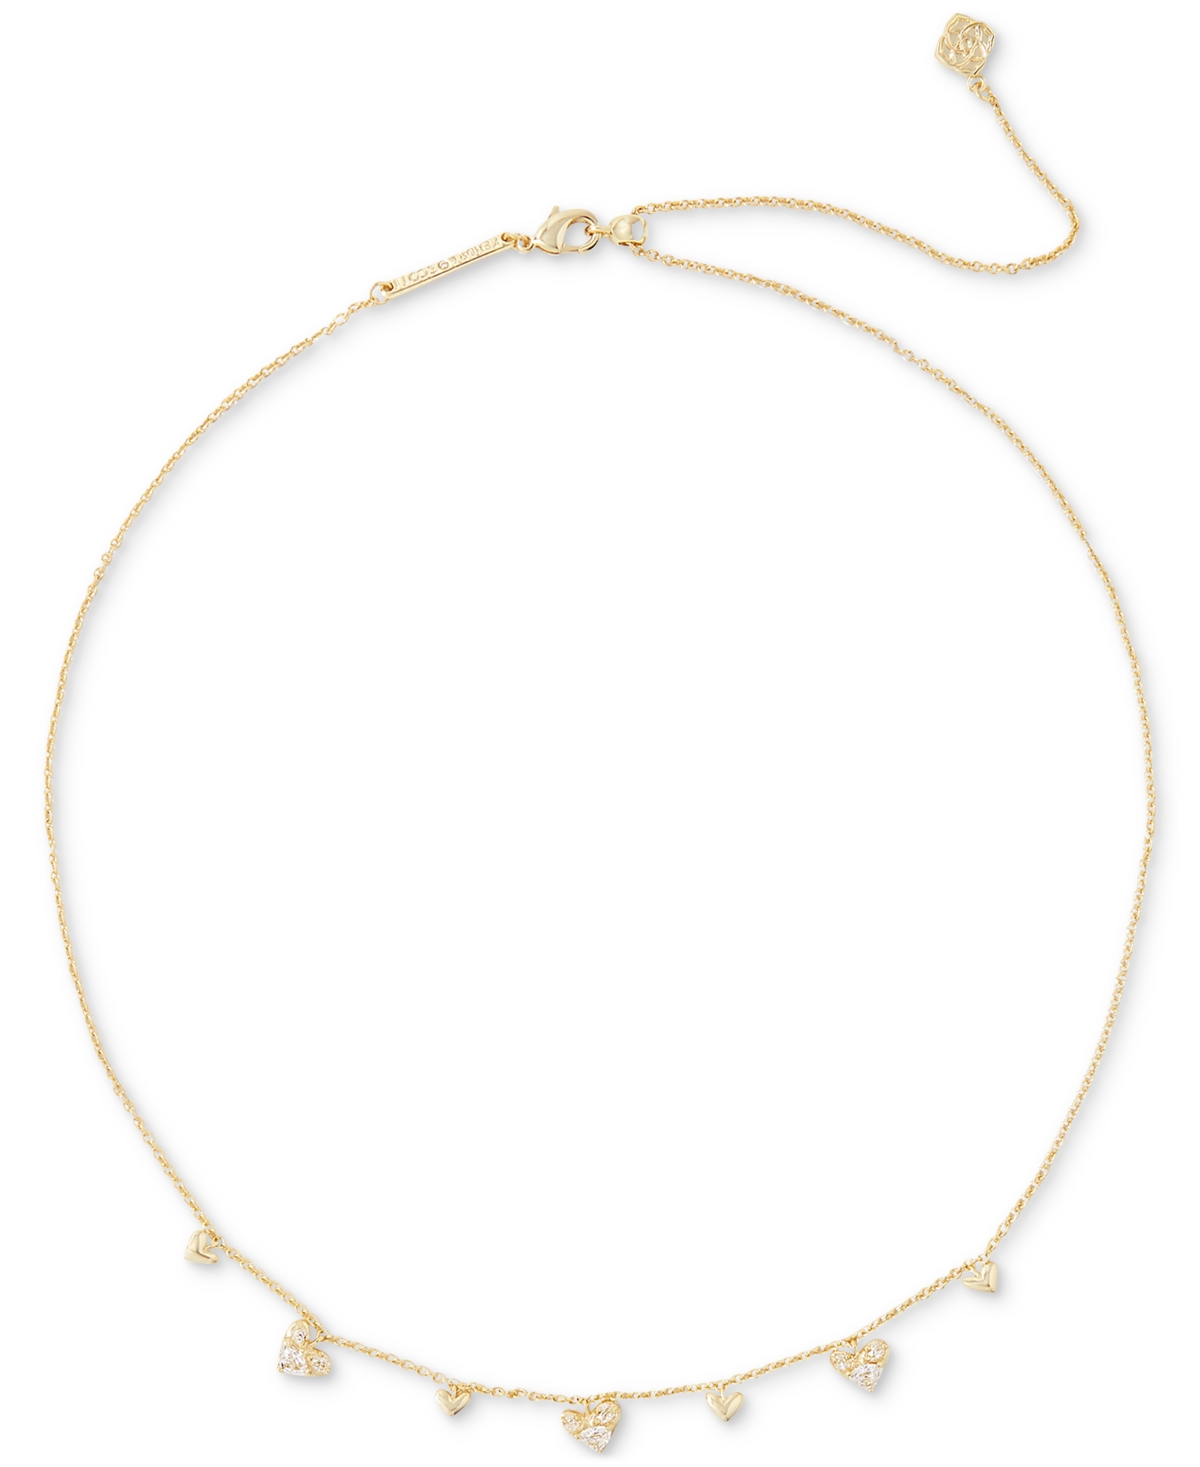 Haven Heart Crystal Choker Necklace, 16" + 3" extender - Gold